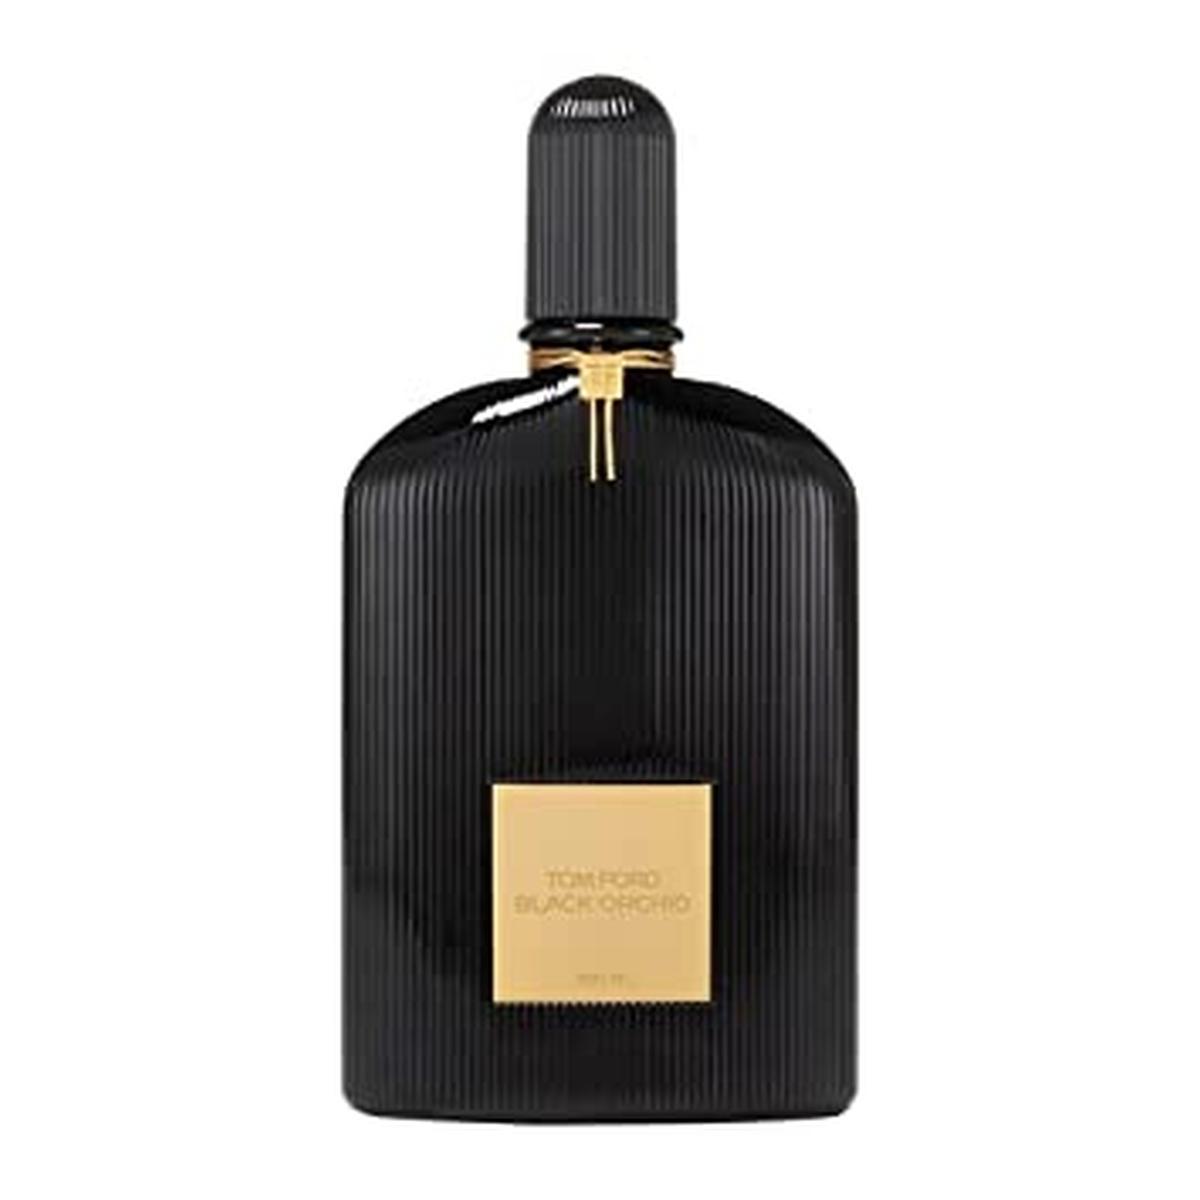 Tom ford Black orchid 100 ml 888066000079 888066000079